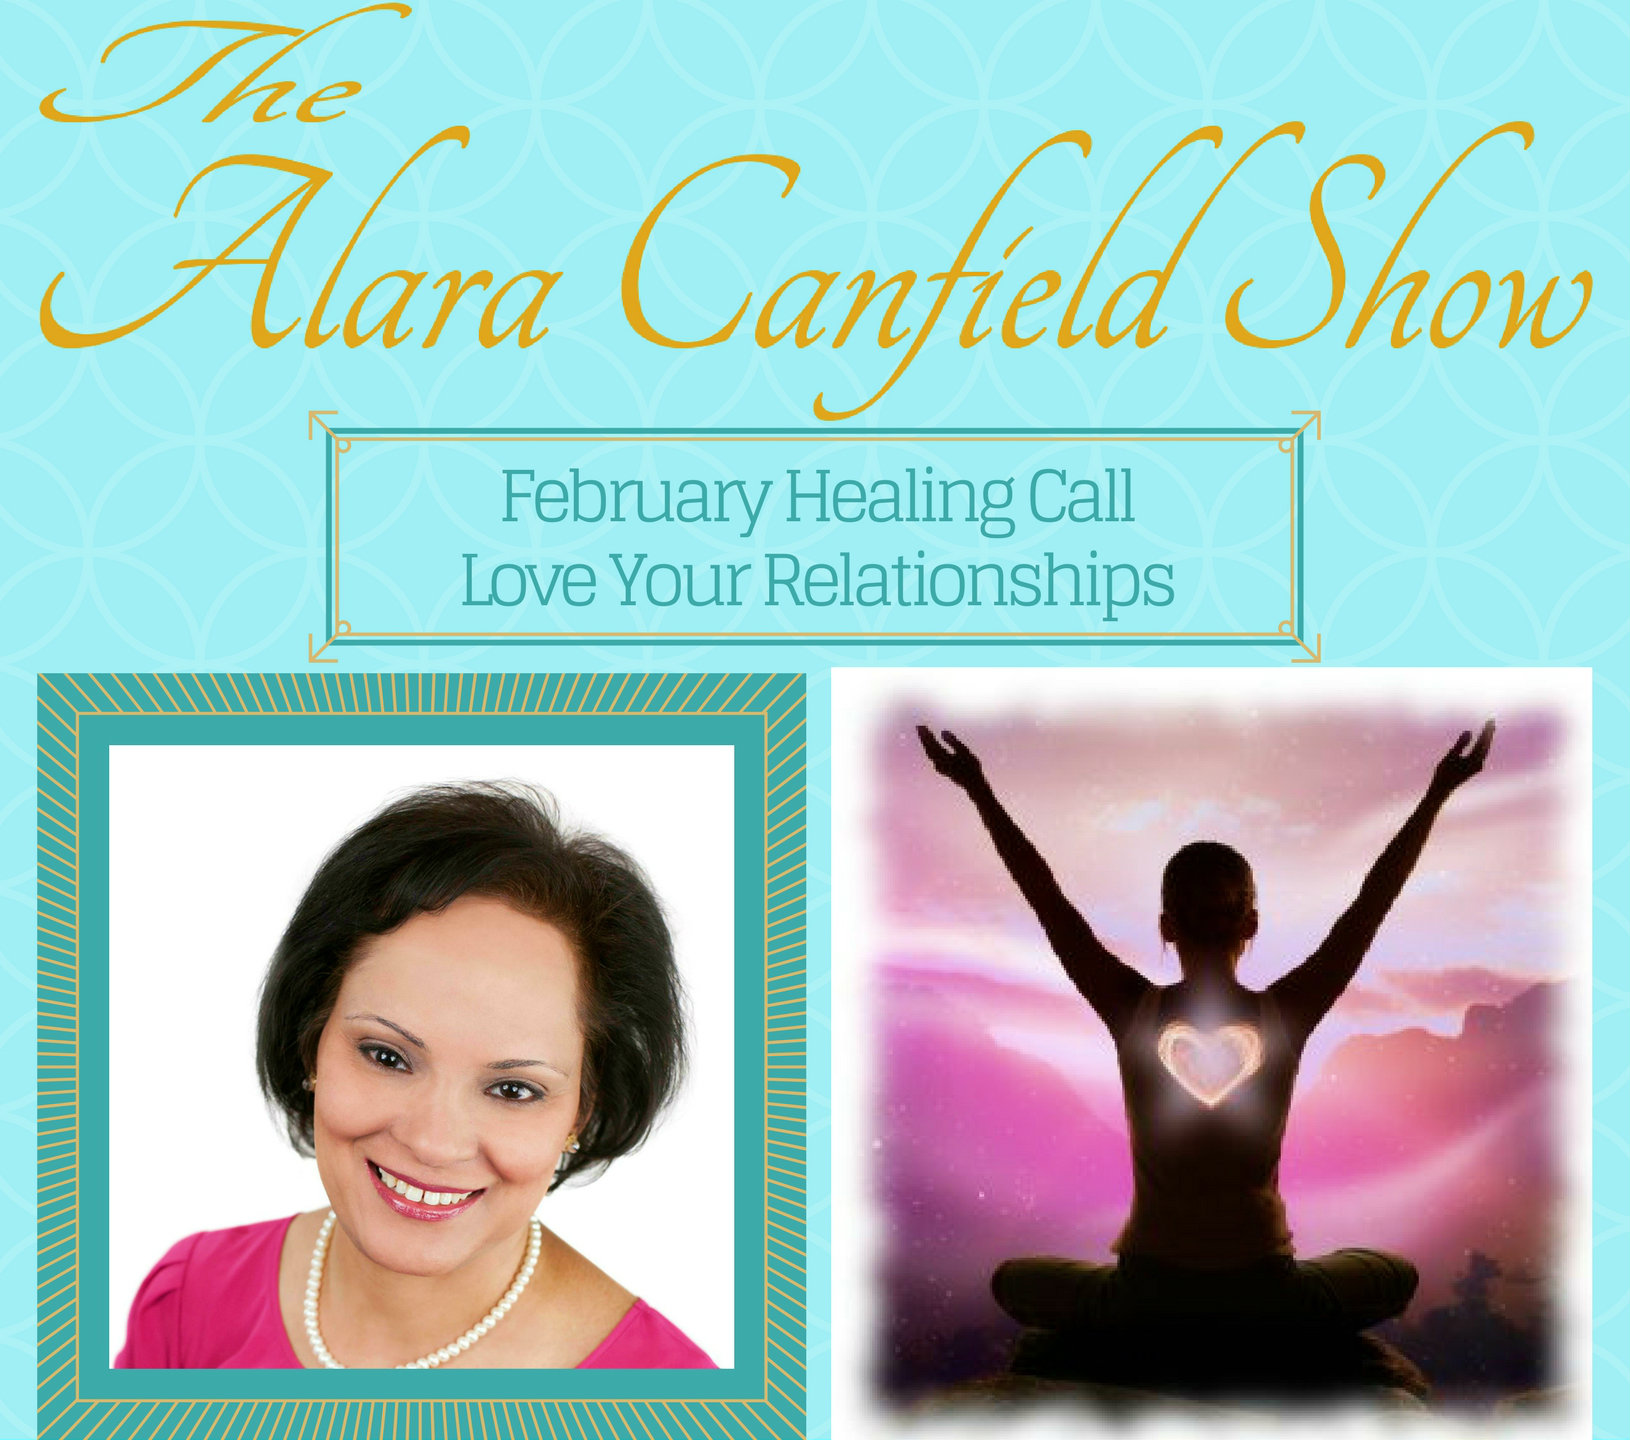 Love Your Relationships - February Healing Call with Alara Canfield